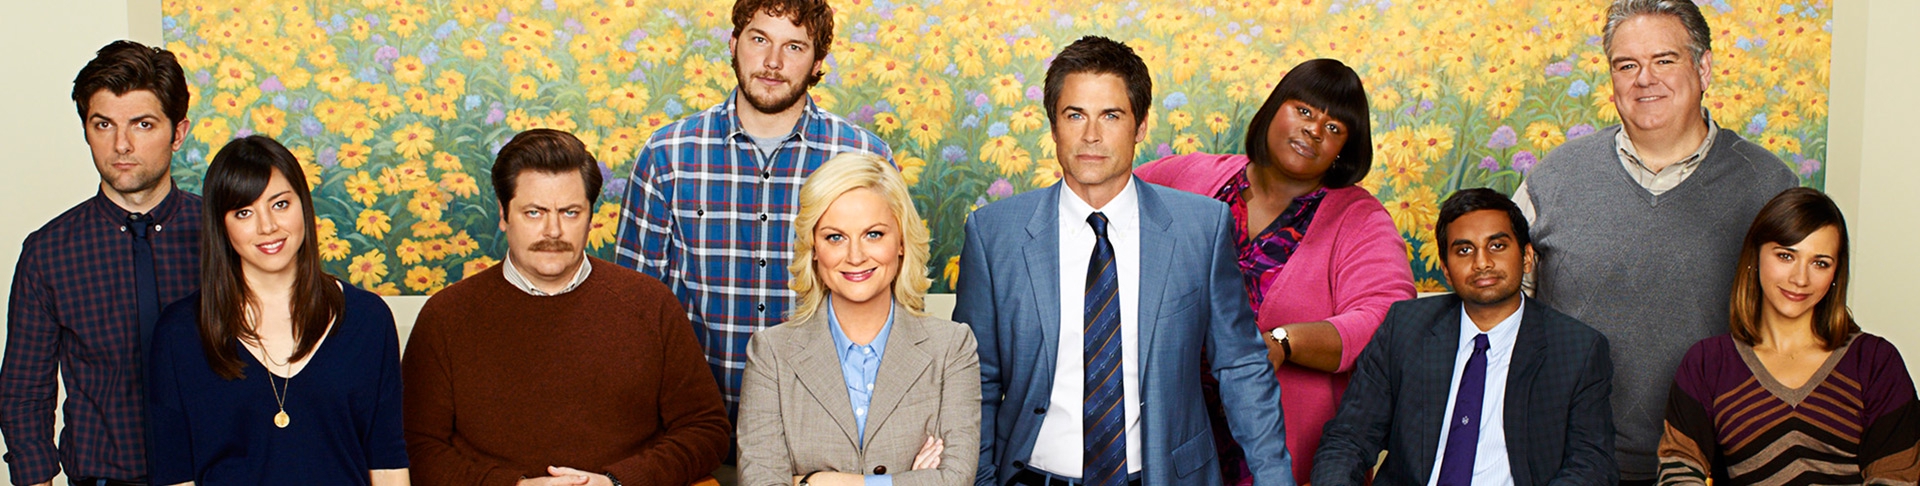 Watch Parks and Recreation Season 5 